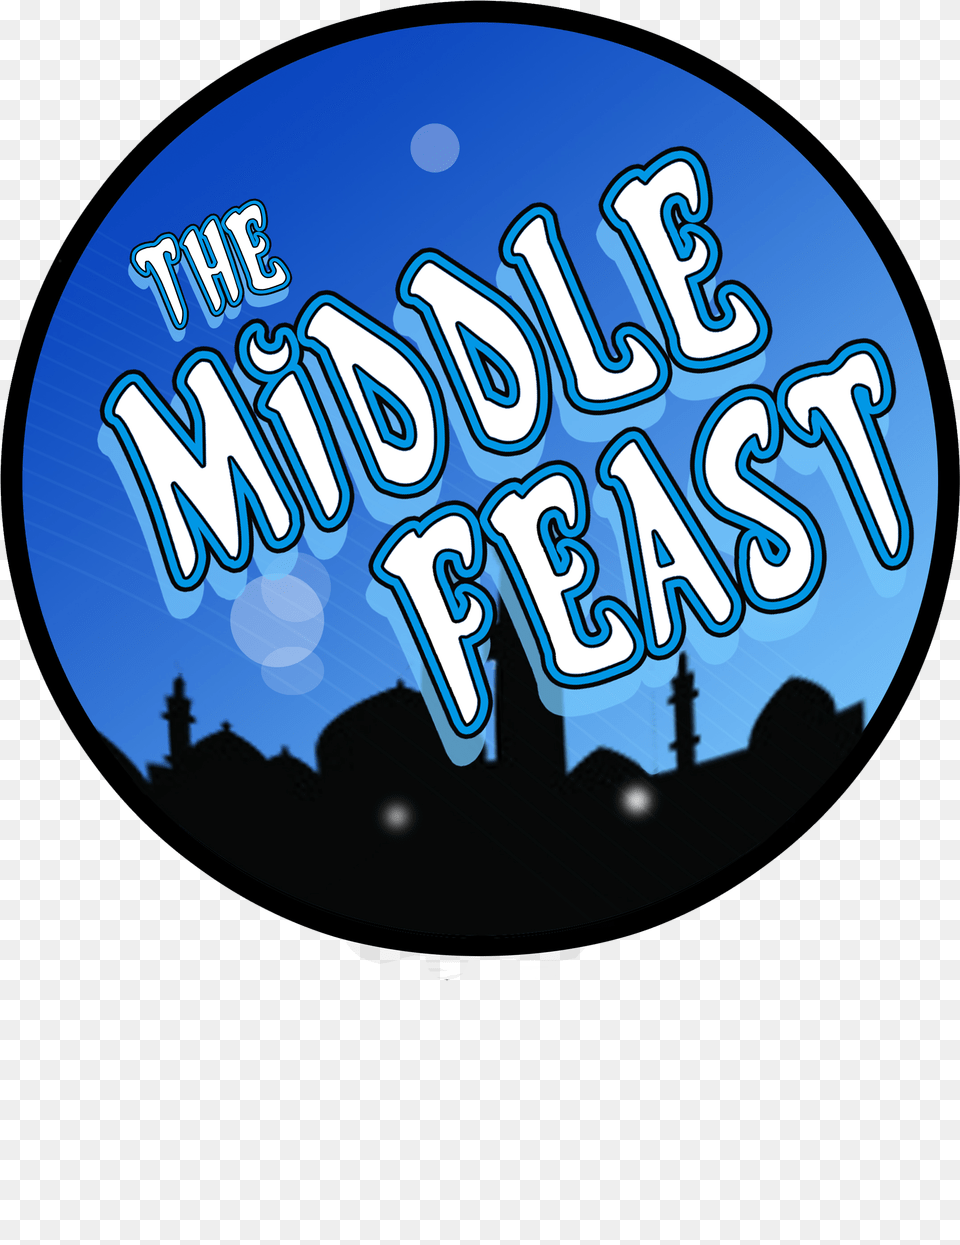 The Middle Feast Food Truck Download Free Png